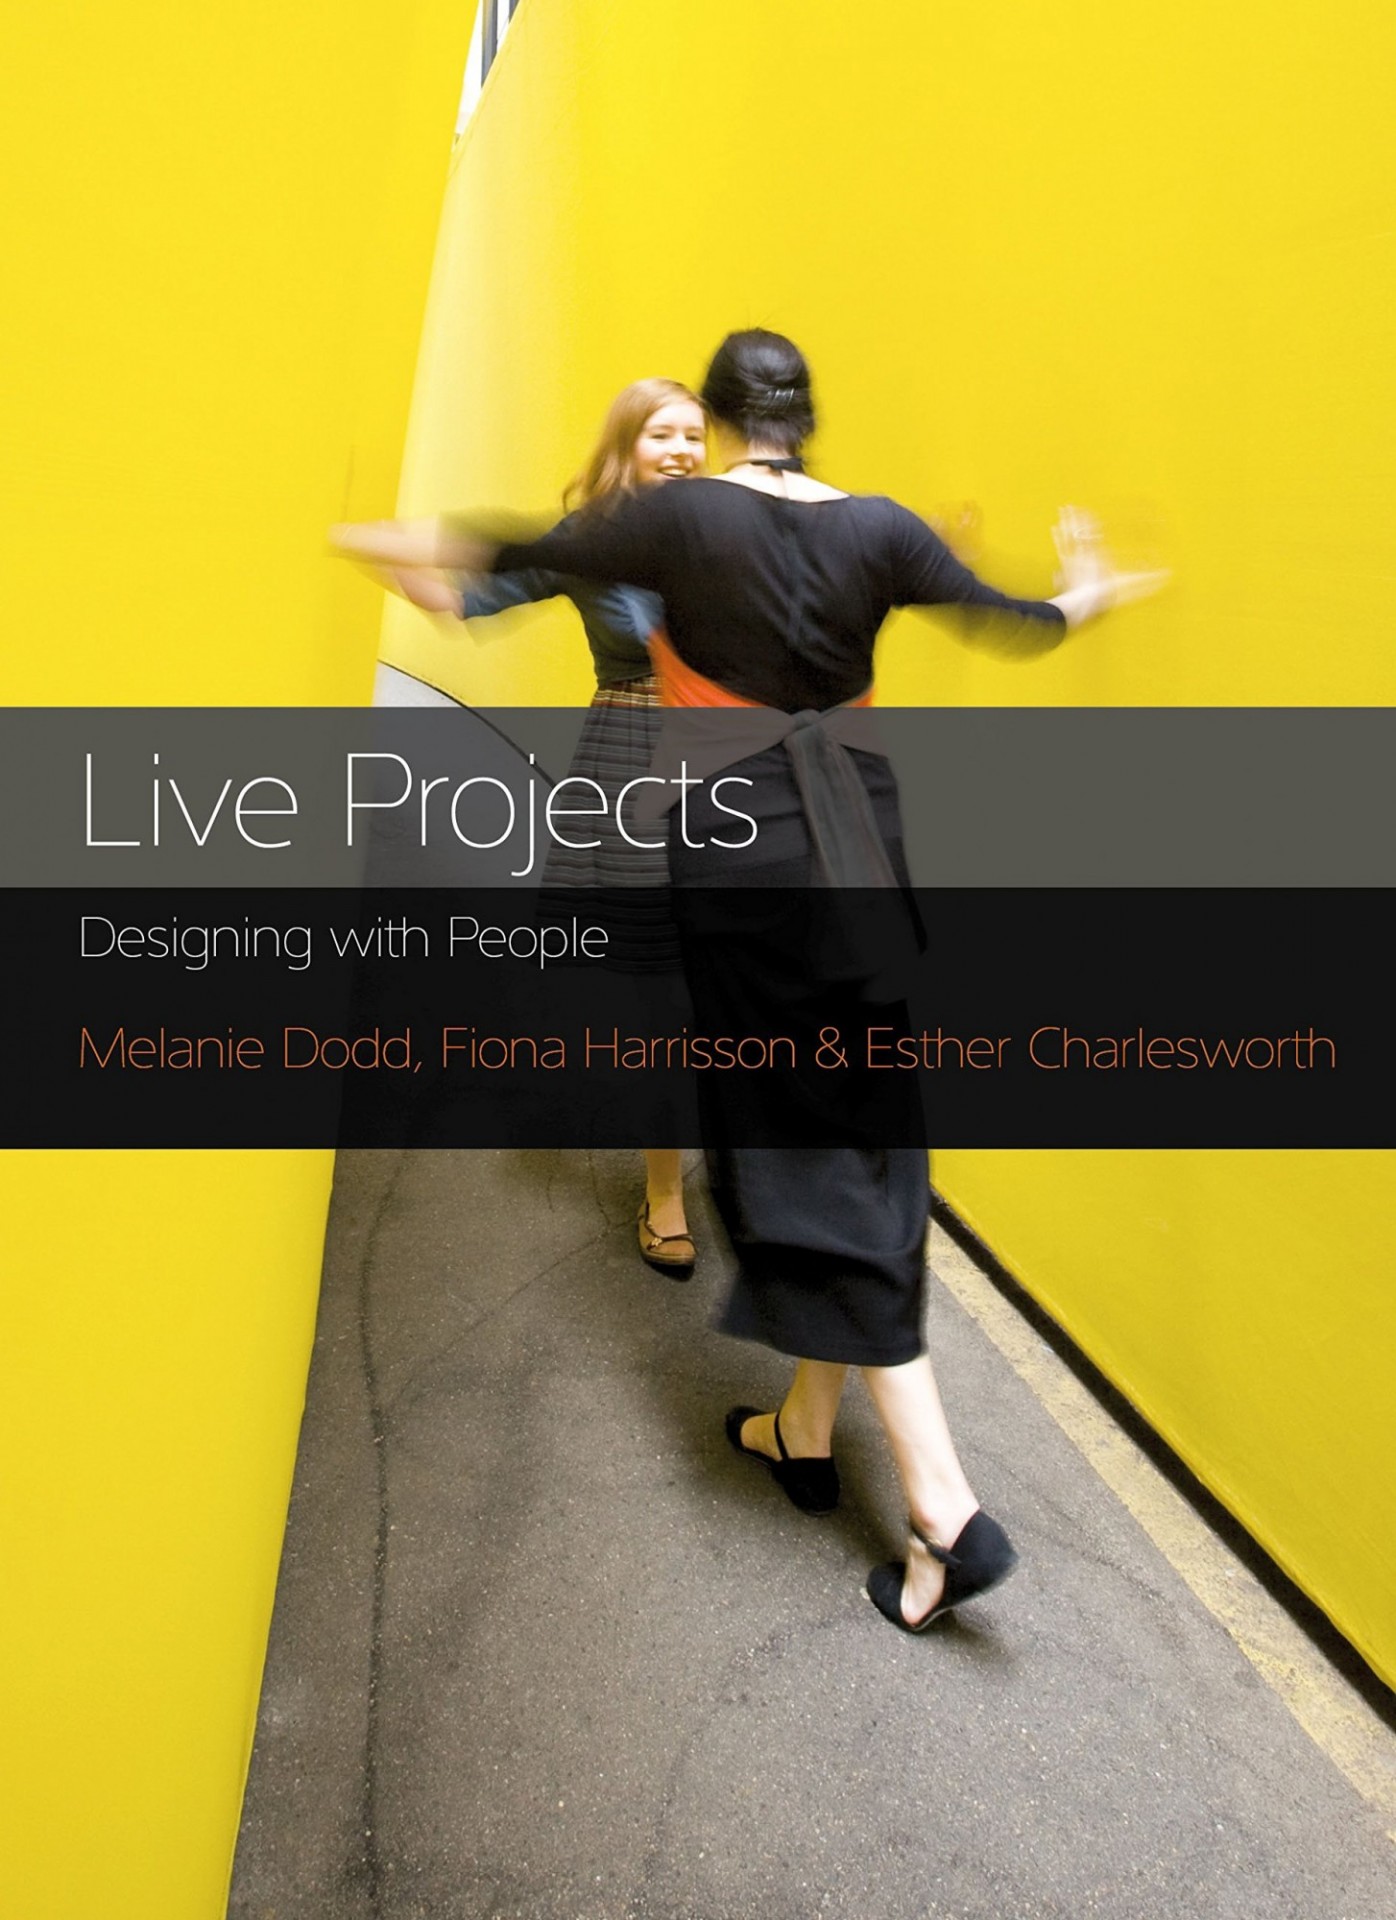 Live Projects: Designing with People book cover